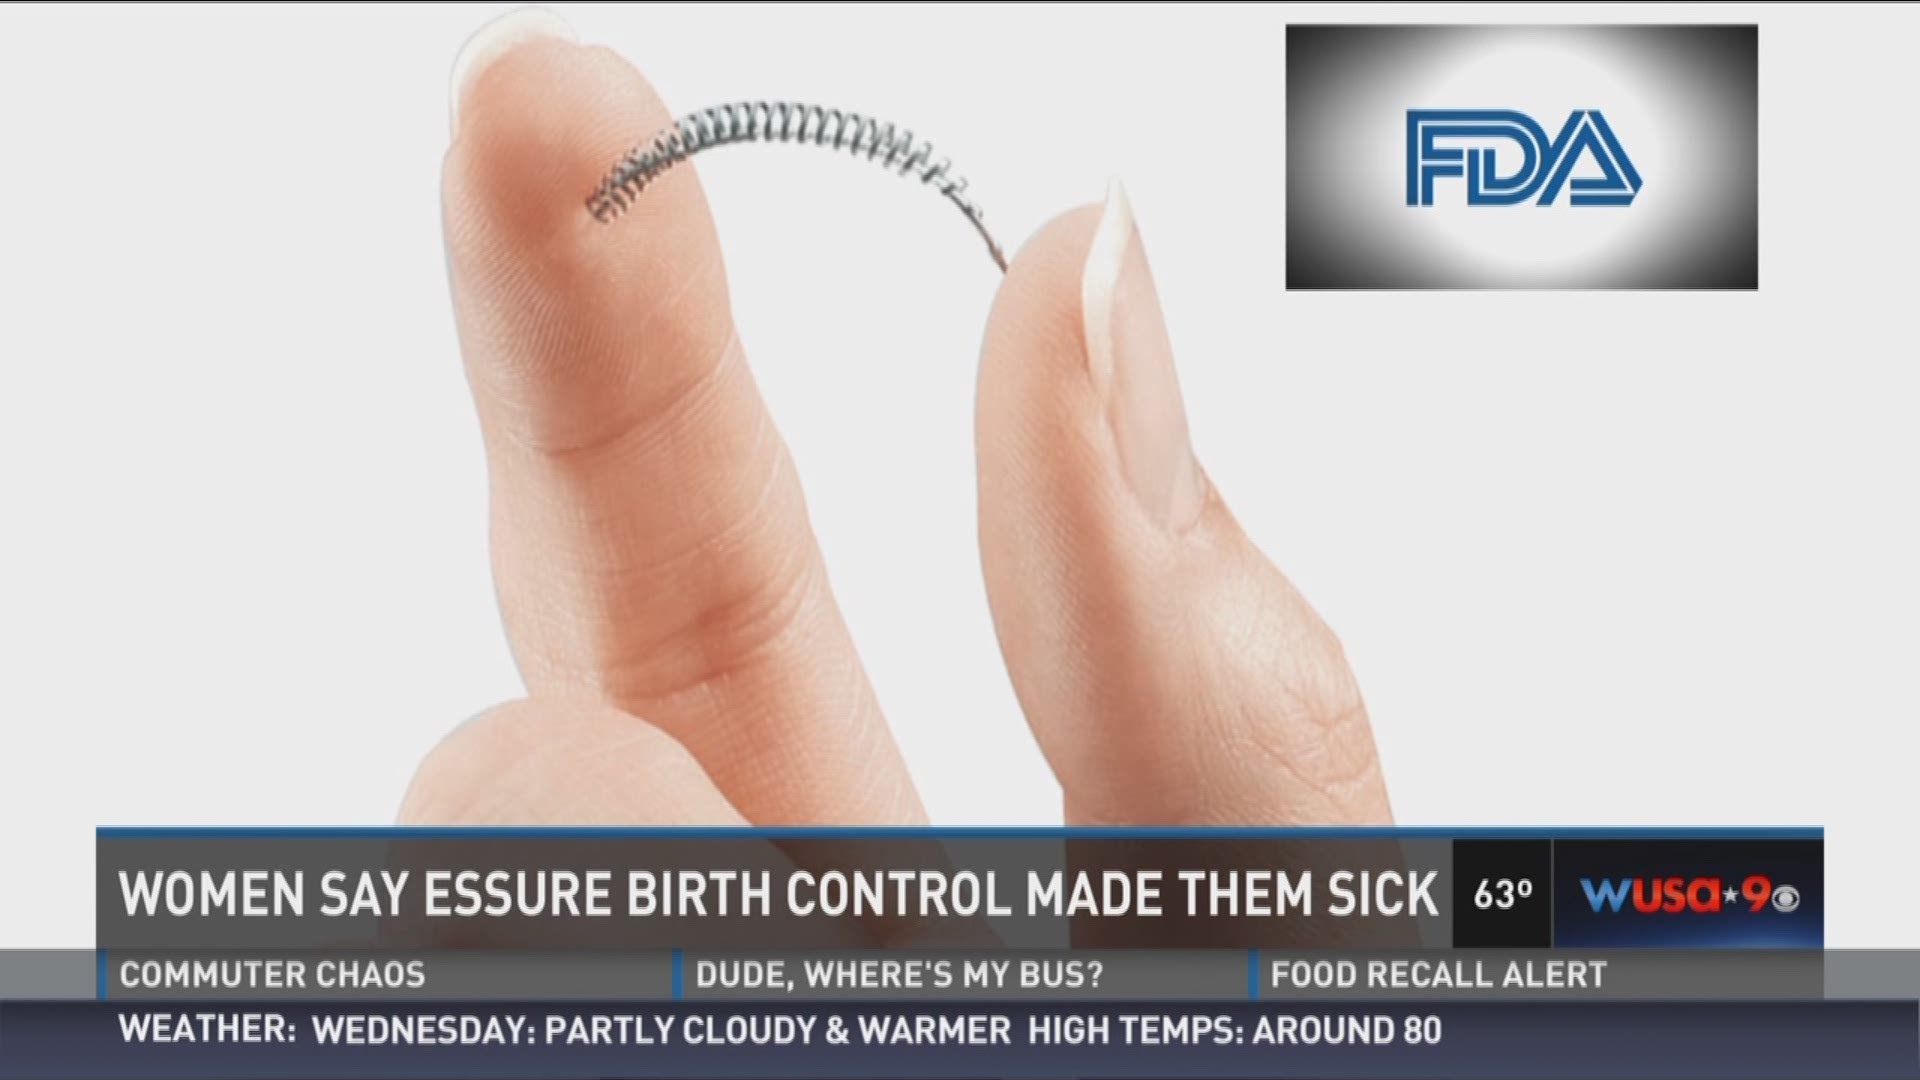 The women were looking for permanent birth control but they say what they found was a medical device that robbed them of their health.